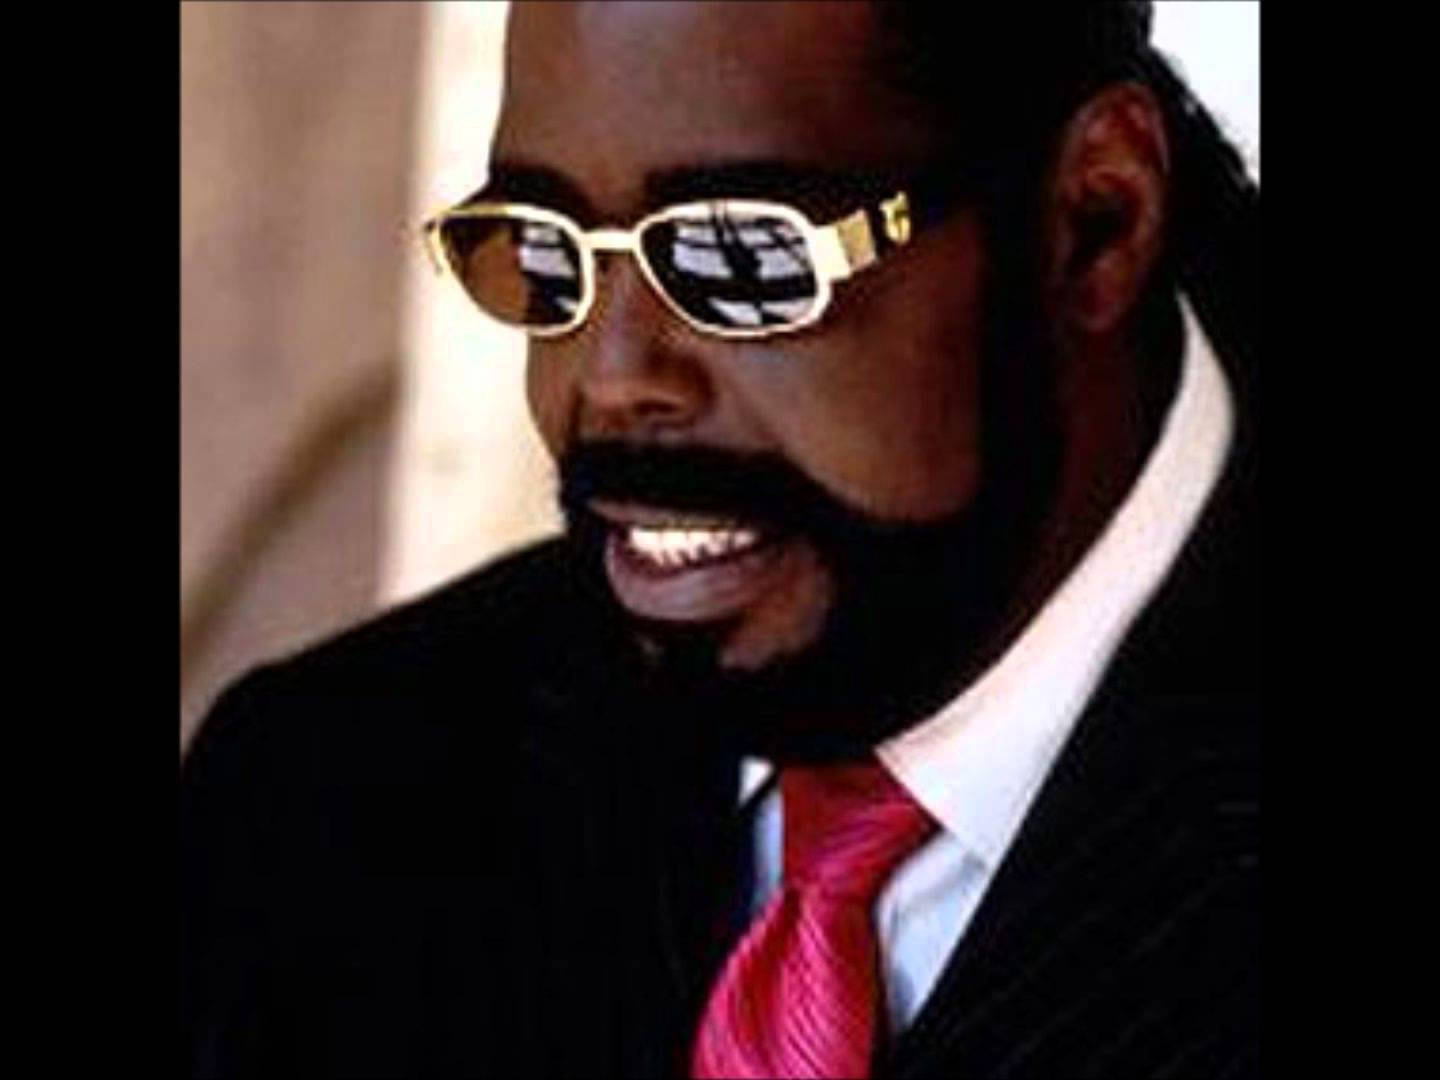 Barry White With Sunglasses Wallpaper